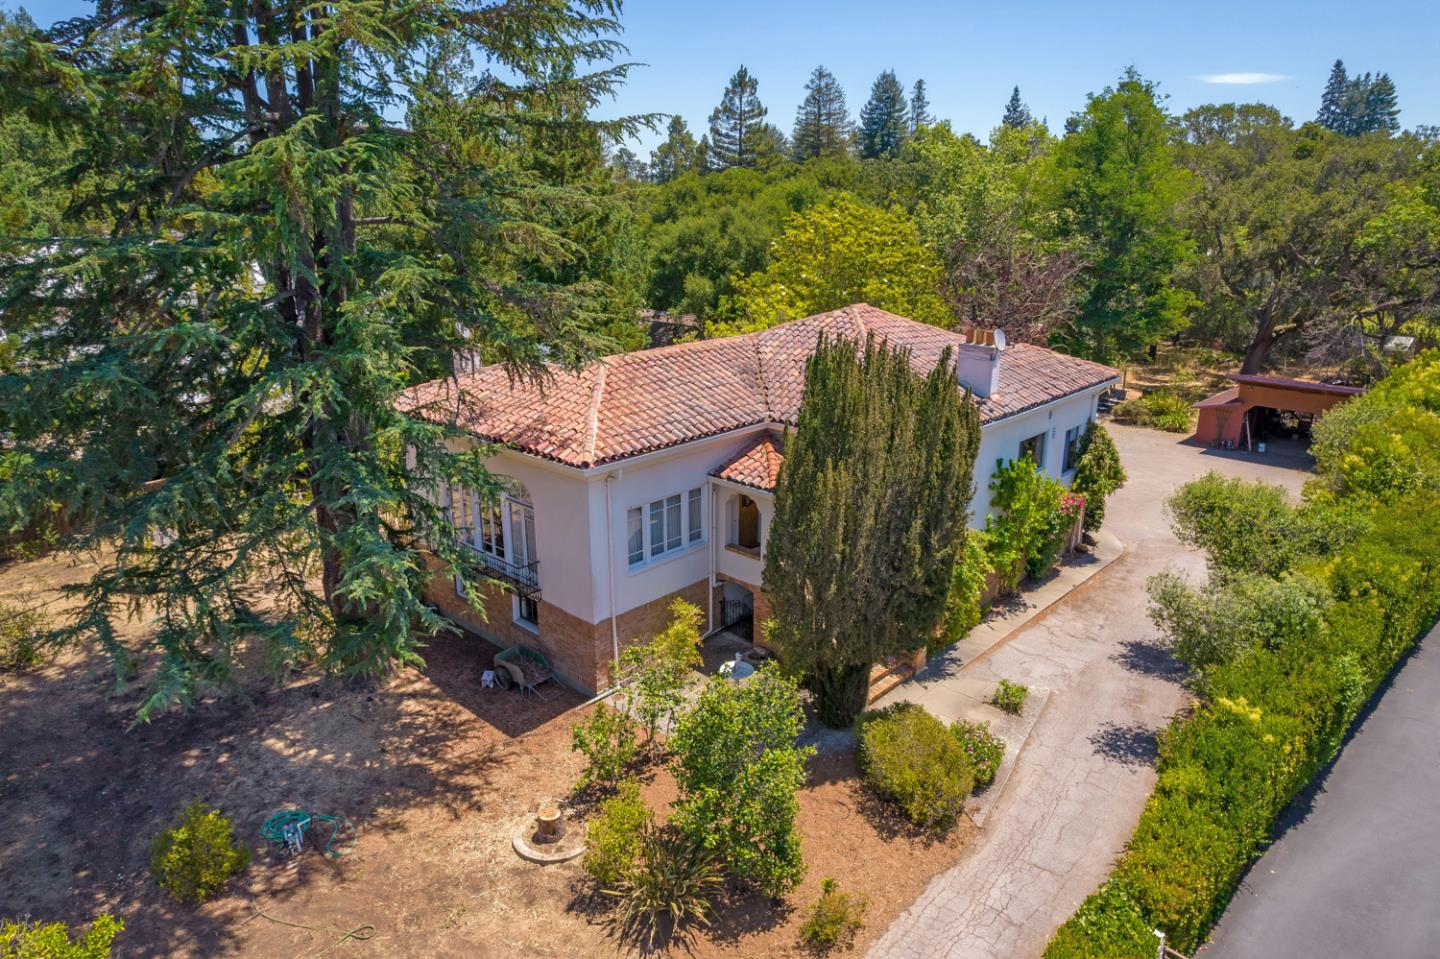 Located on one of West Atherton's most prestigious streets, this one-of-a-kind fine two-story Spanish inspired estate is situated on a large level lot with an established fruit orchard.  The main residence features 5 spacious bedrooms and 2.5 bathrooms with intricate details throughout. Beyond the main home lies a separate 1 bed/1 bath cottage with a kitchen, perfect for extended family, guests or additional office space.  167 Almendral Avenue is secluded yet conveniently located just minutes away from The Circus Club, Stanford University, renowned private schools, Sand Hill Road, and some of the most successful high-tech companies (Facebook, Google, and Apple). Atherton's mid-peninsula location is also centrally located between San Francisco and San Jose International Airports. Almendral Avenue is one of the few remaining quiet streets in Atherton.  Because of its privacy, beauty, and location, this represents a rare opportunity to own one of the finest properties in Atherton.